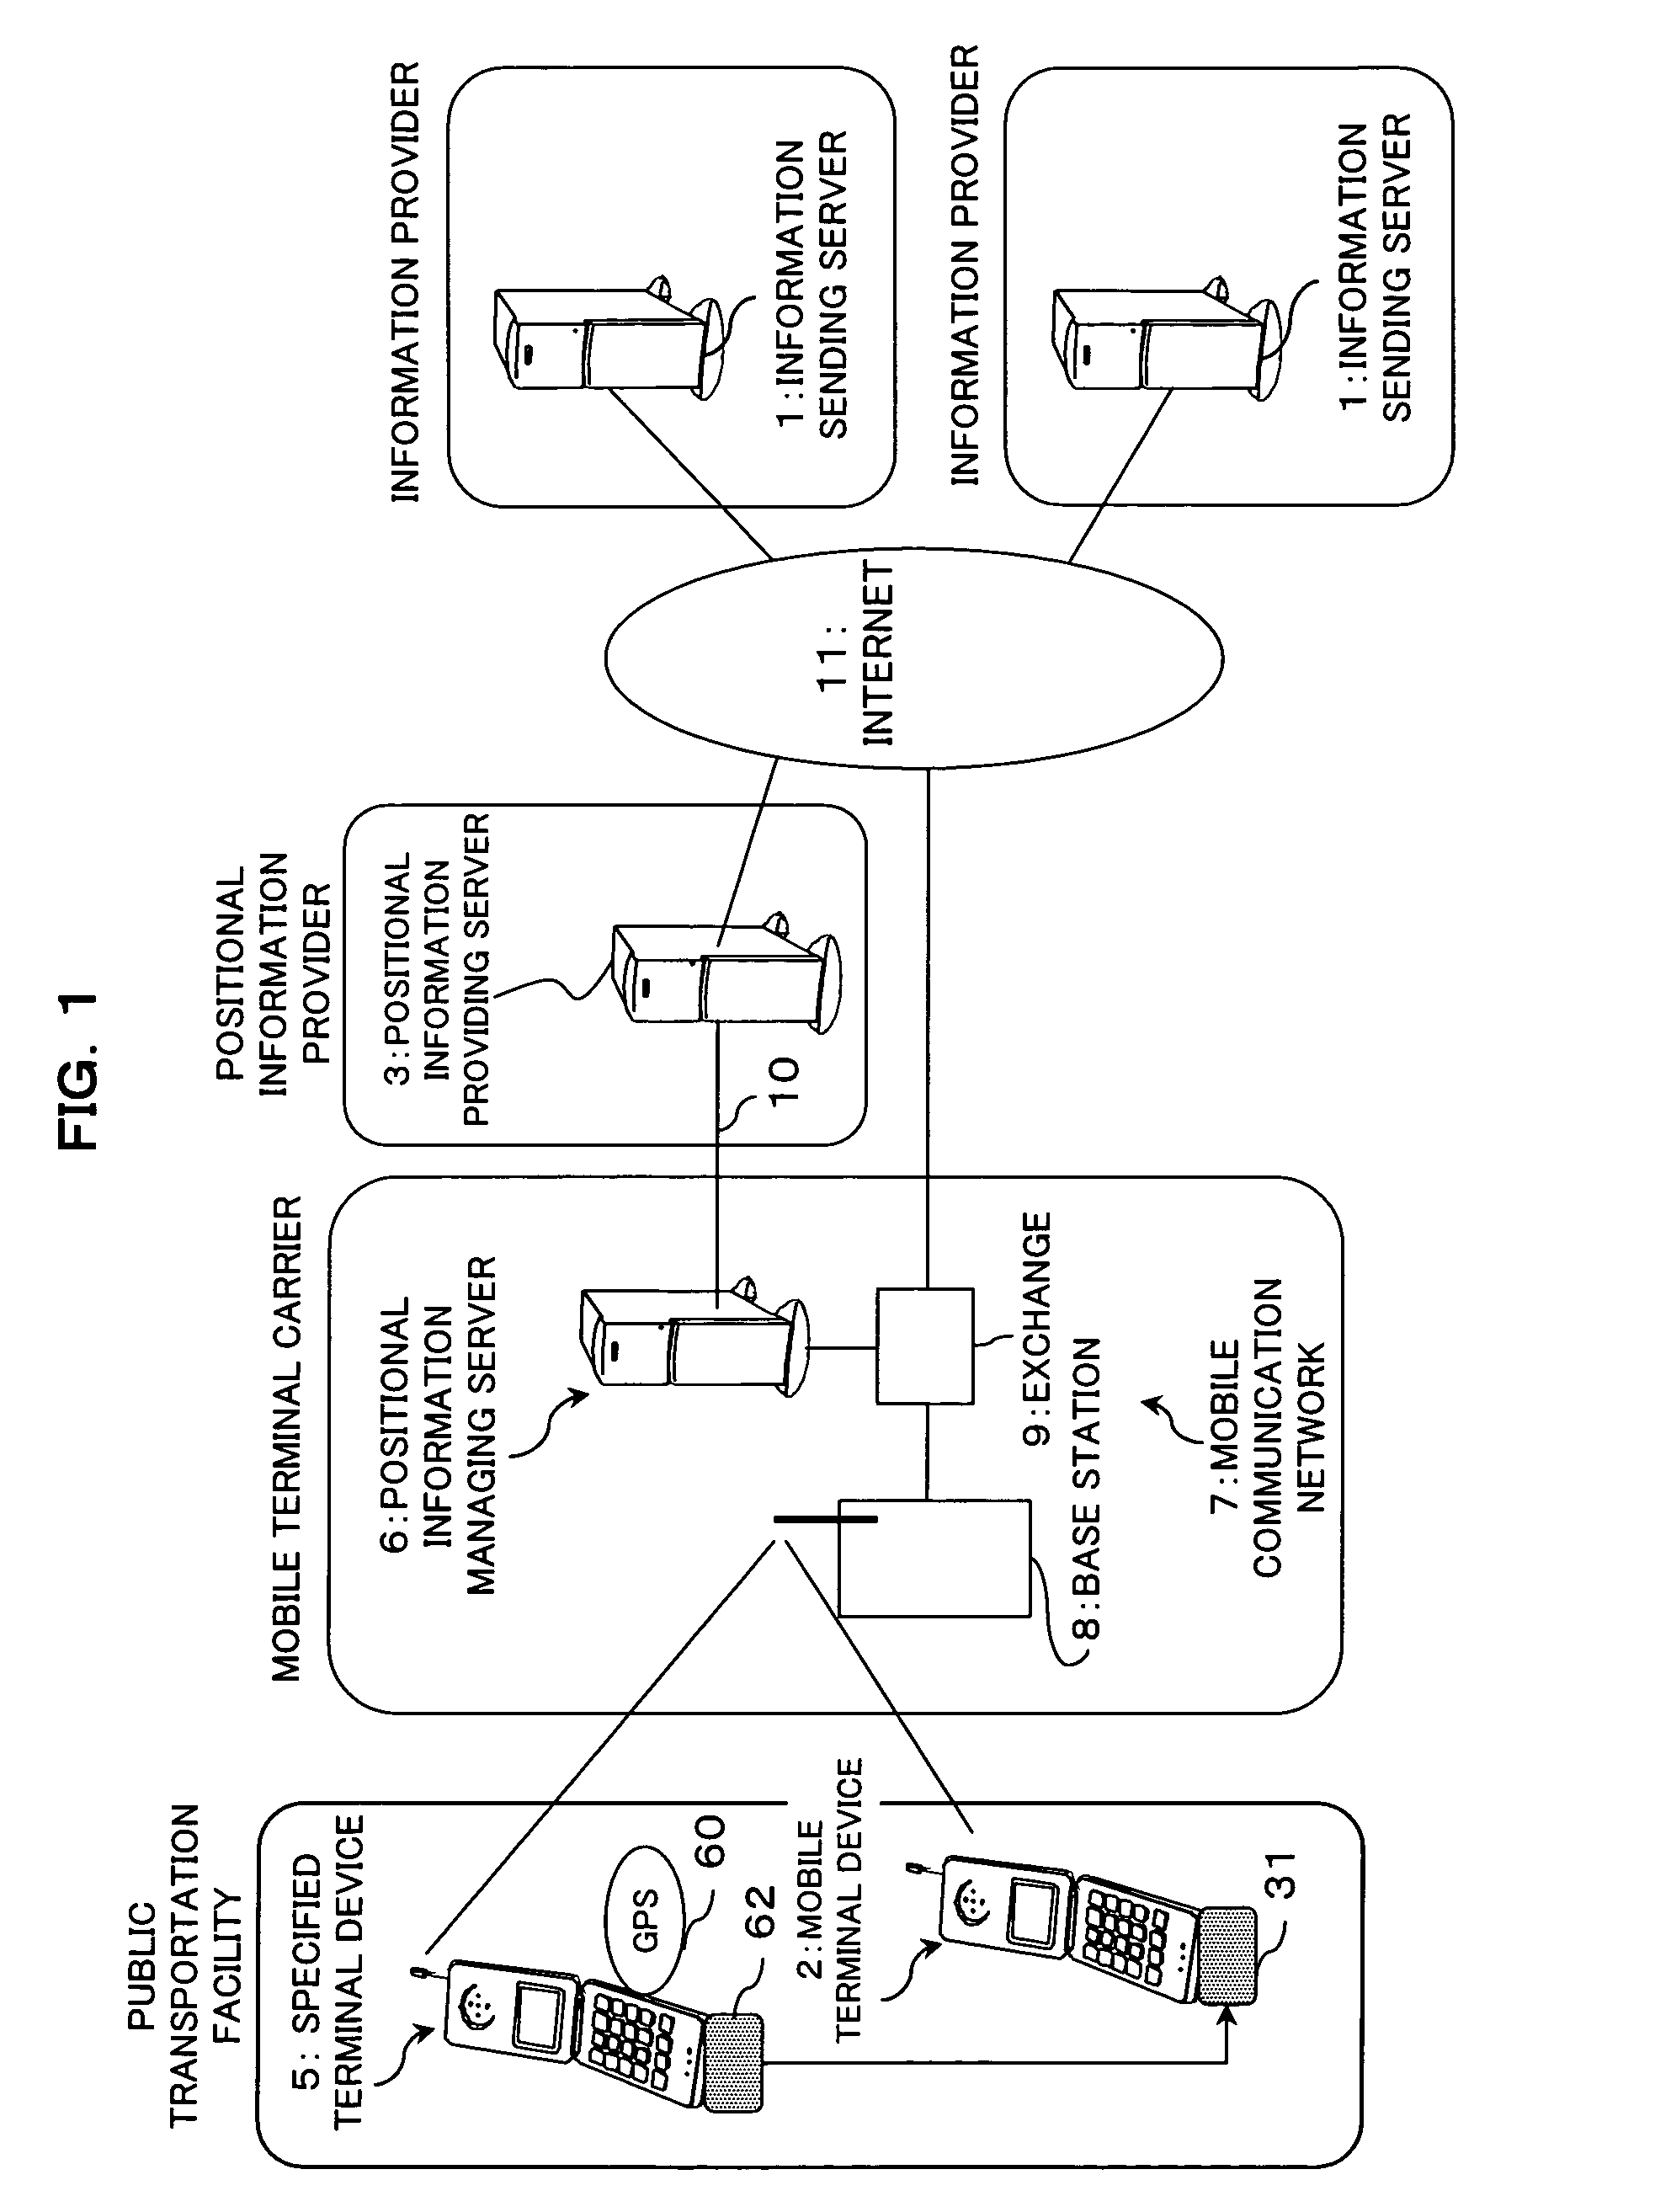 Positional information providing method and positional information providing system